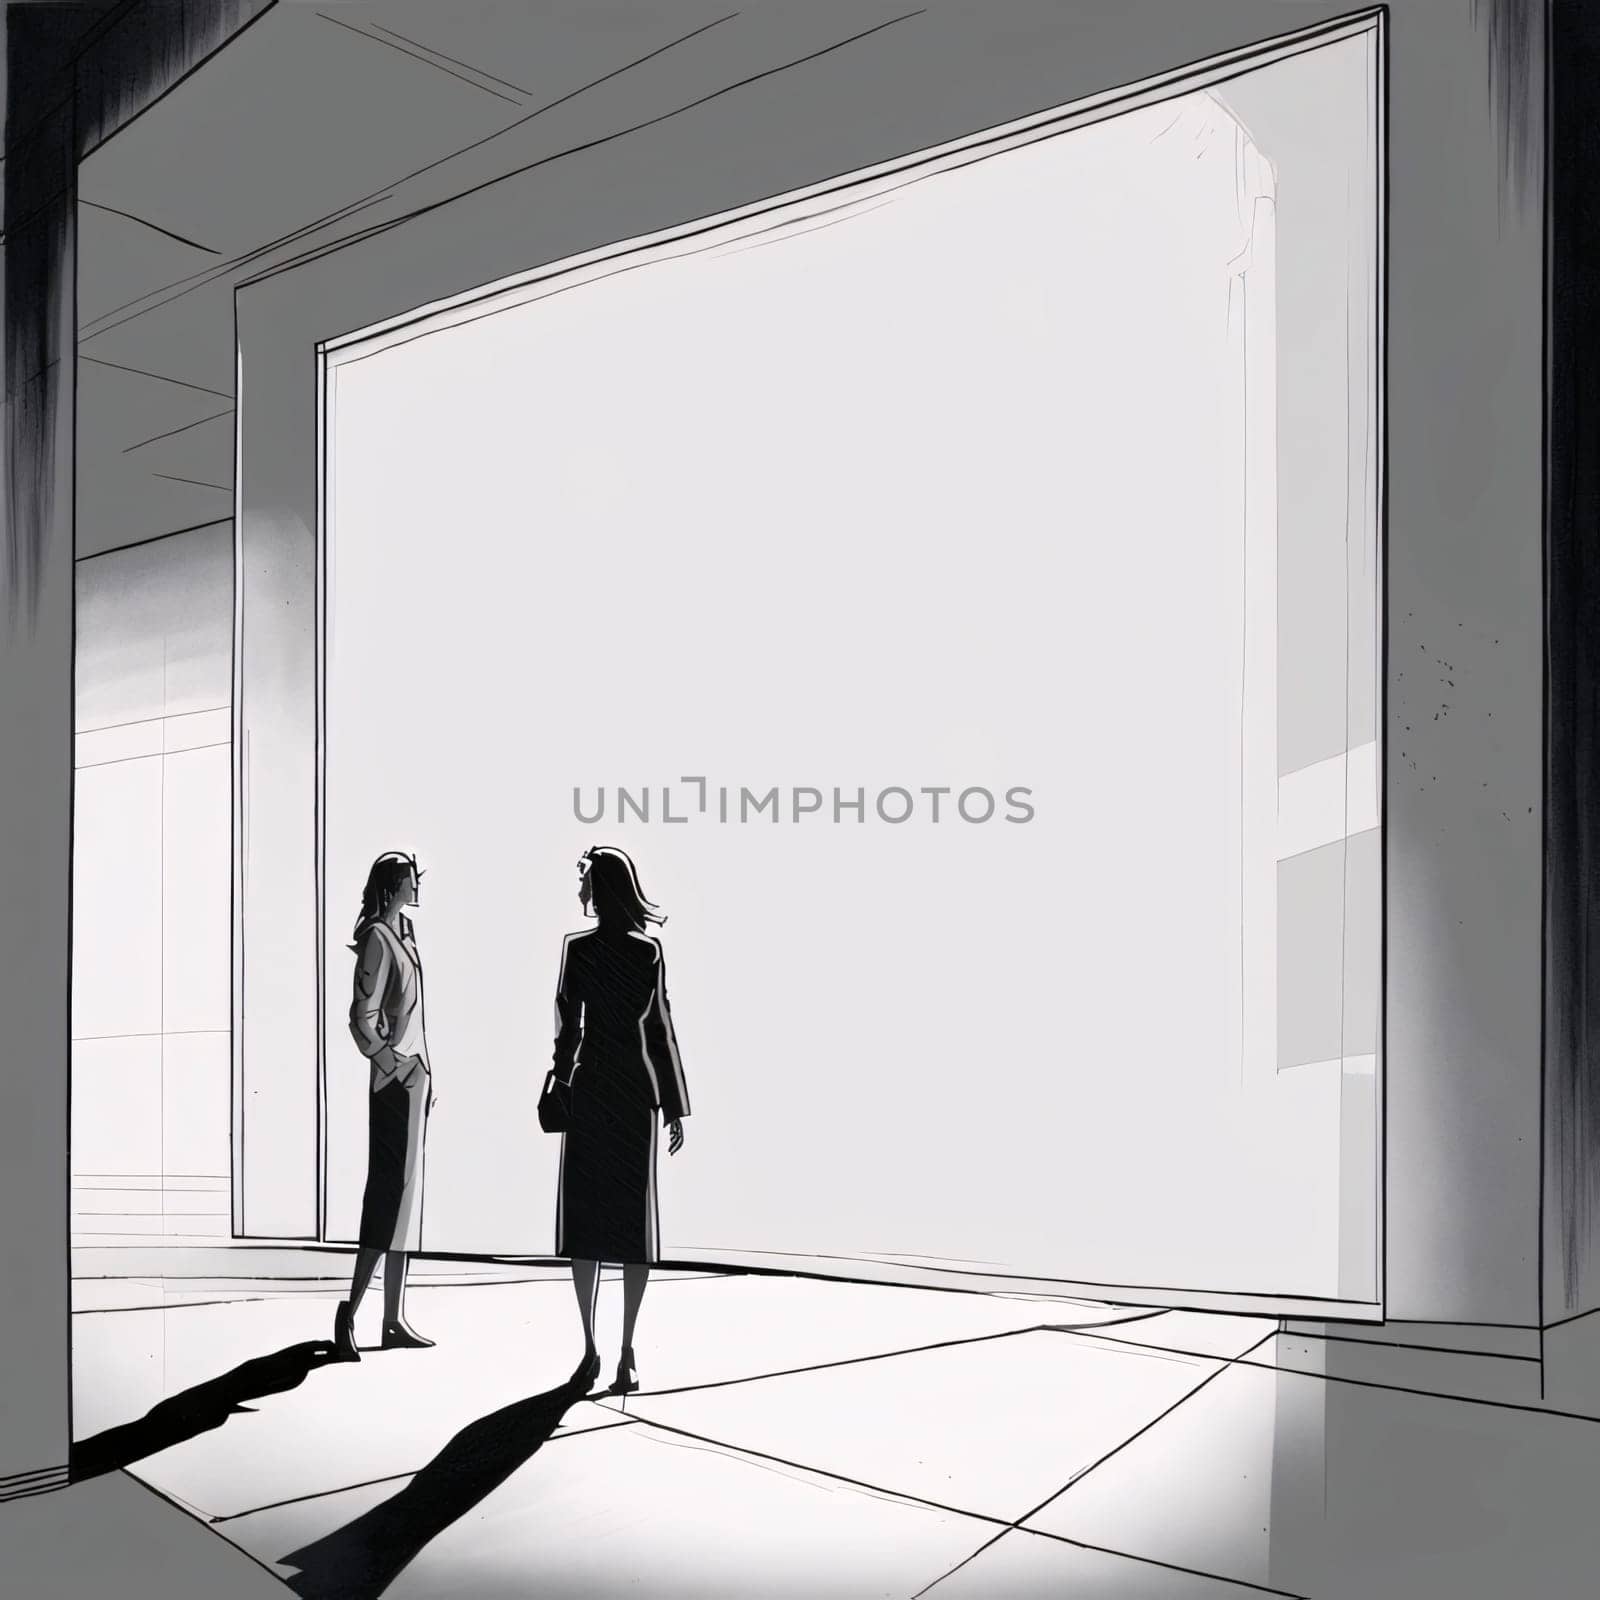 Illustration two women standing in front of a large white screen. Graphic with space for your own content.